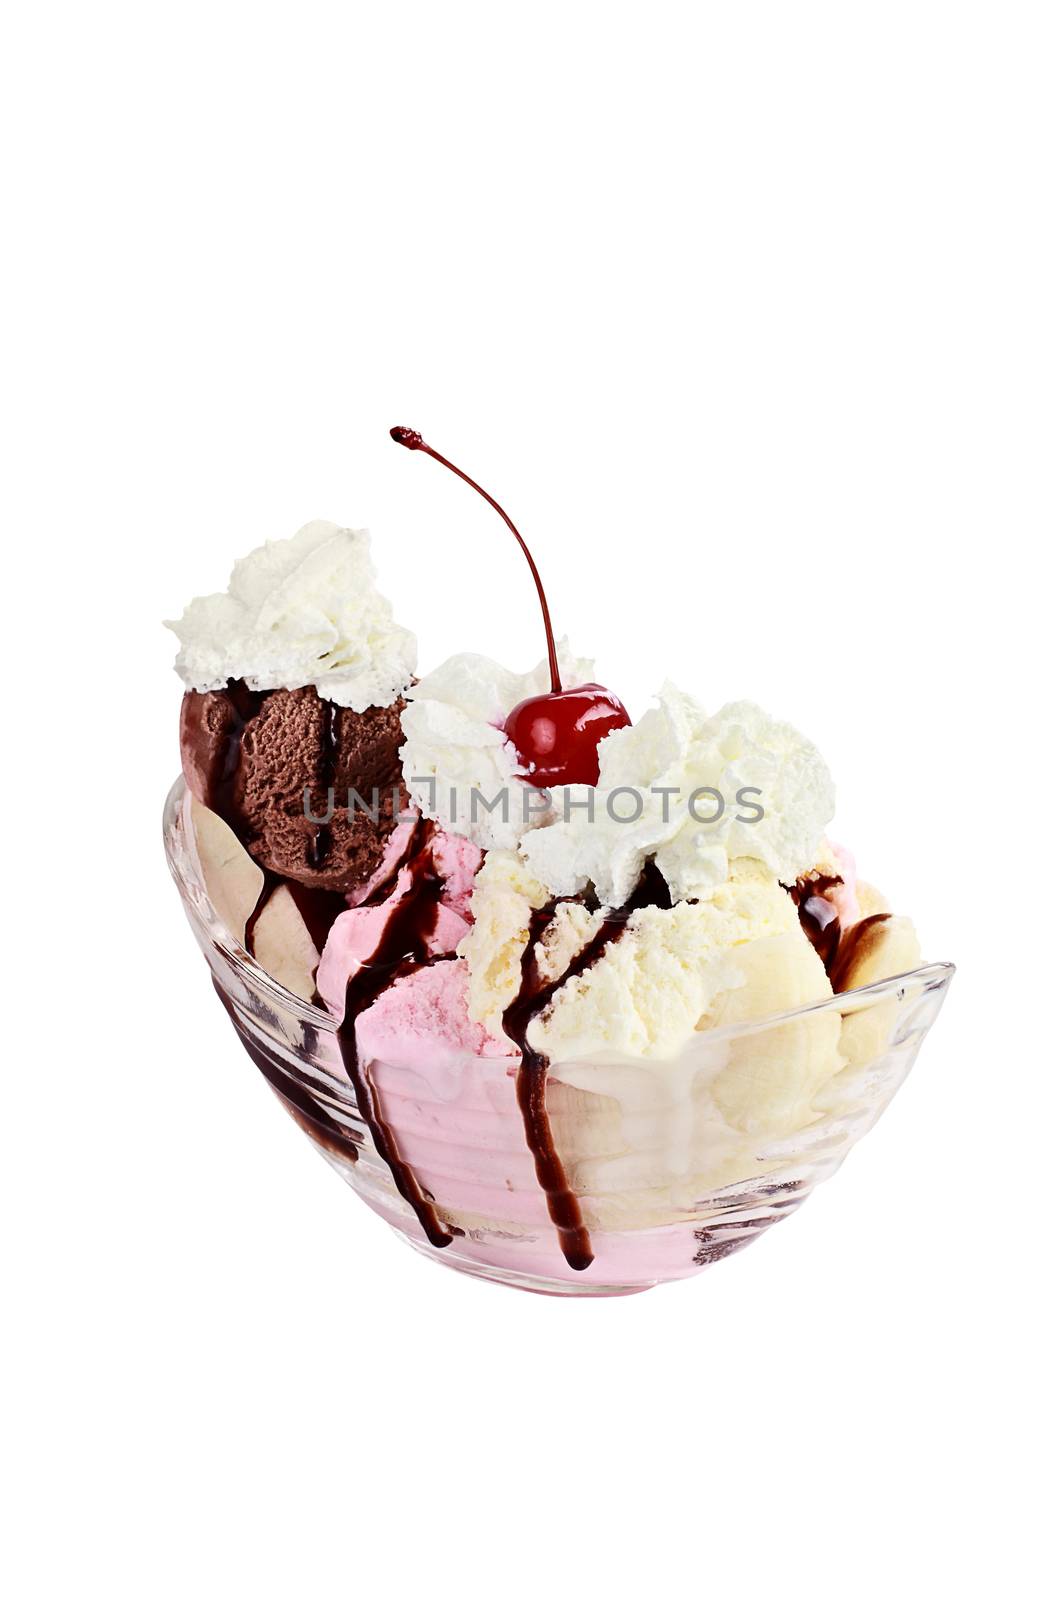 Banana split isolated on white background with clipping path included.